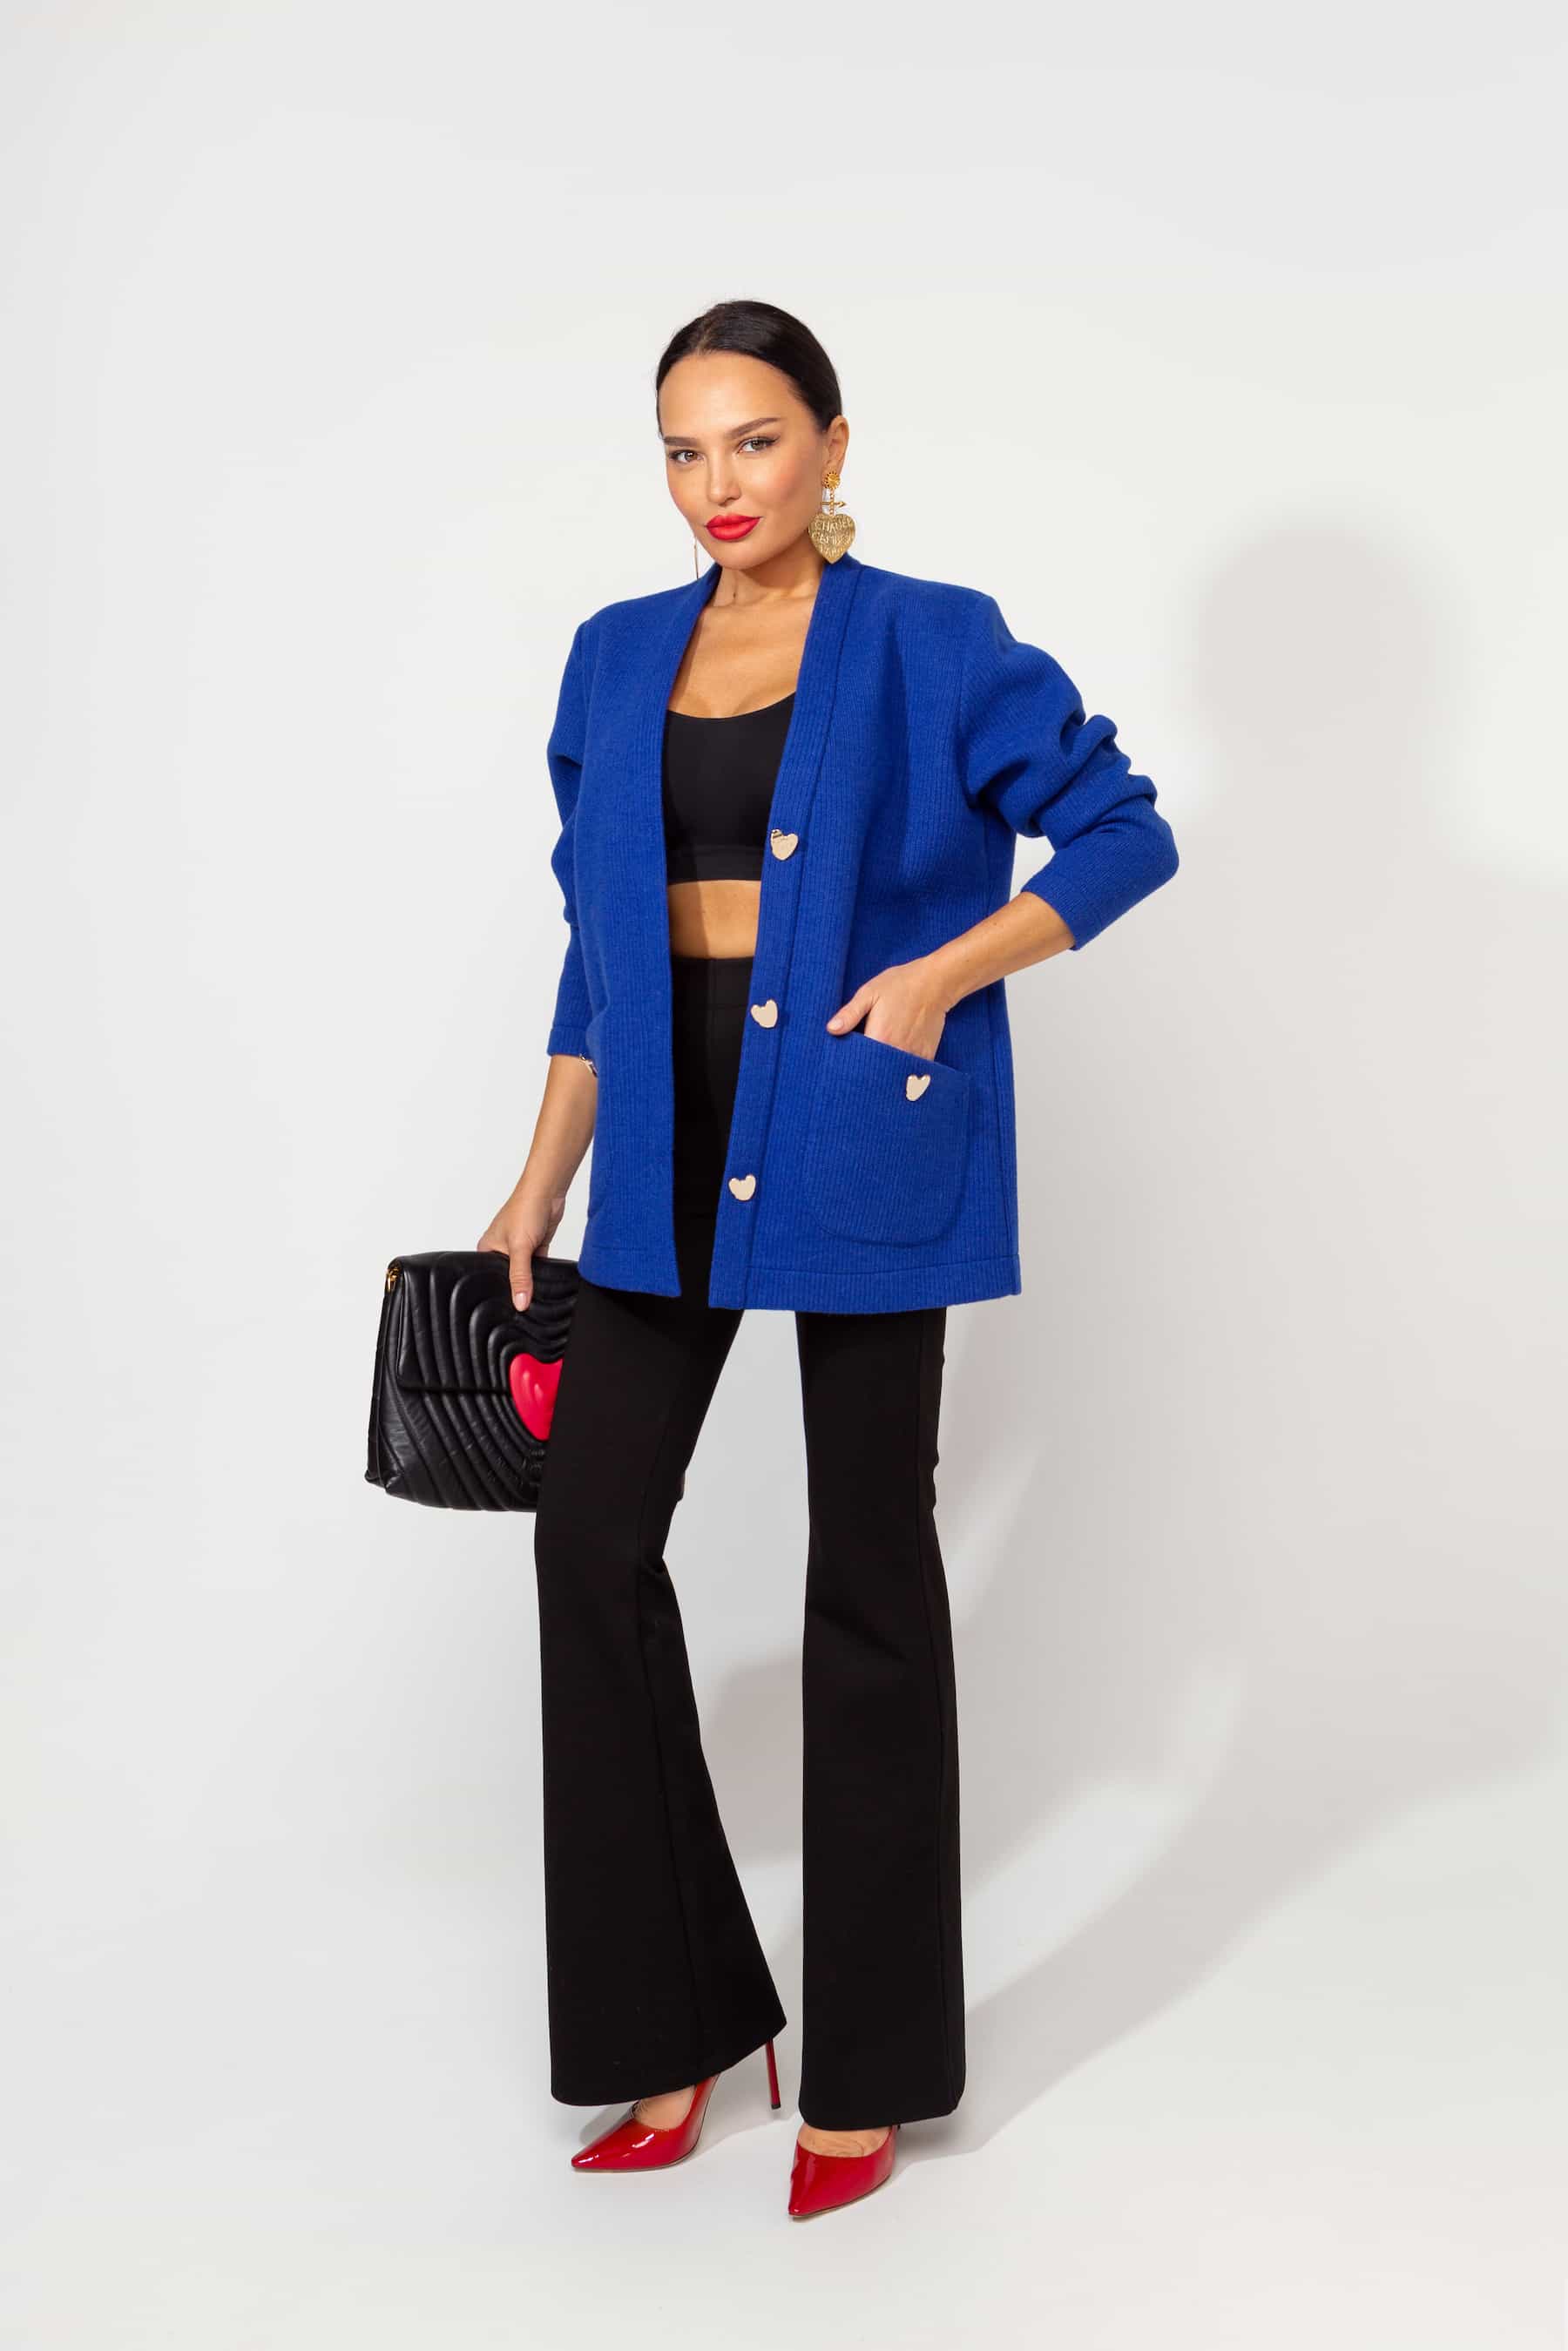 Electric blue cardigan with gold buttons